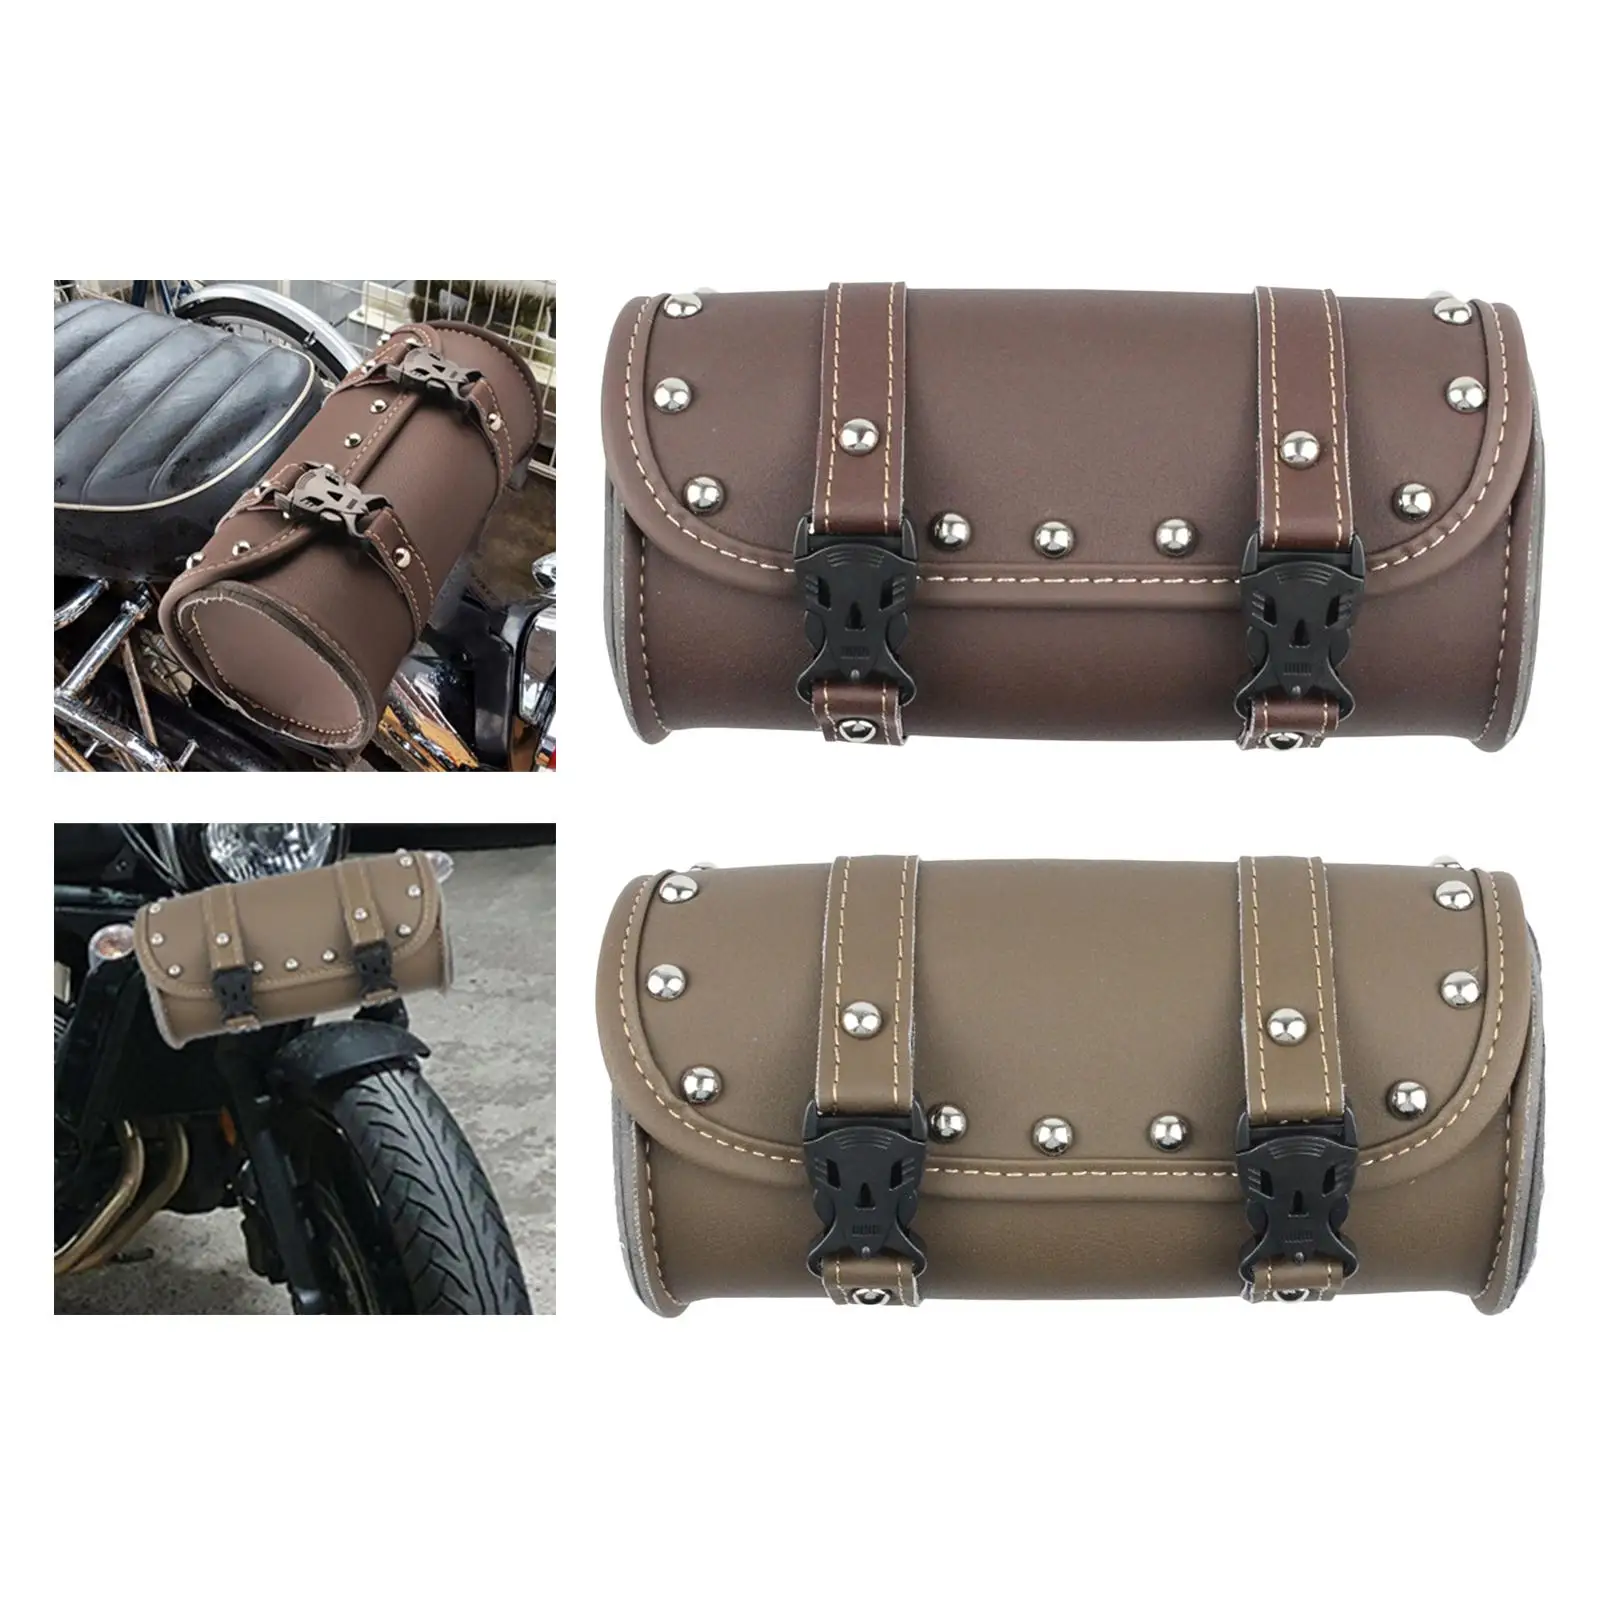 

PU Leather Motorcycle Tool Bag Storage Pouch Saddle Bags for ATV Scooters